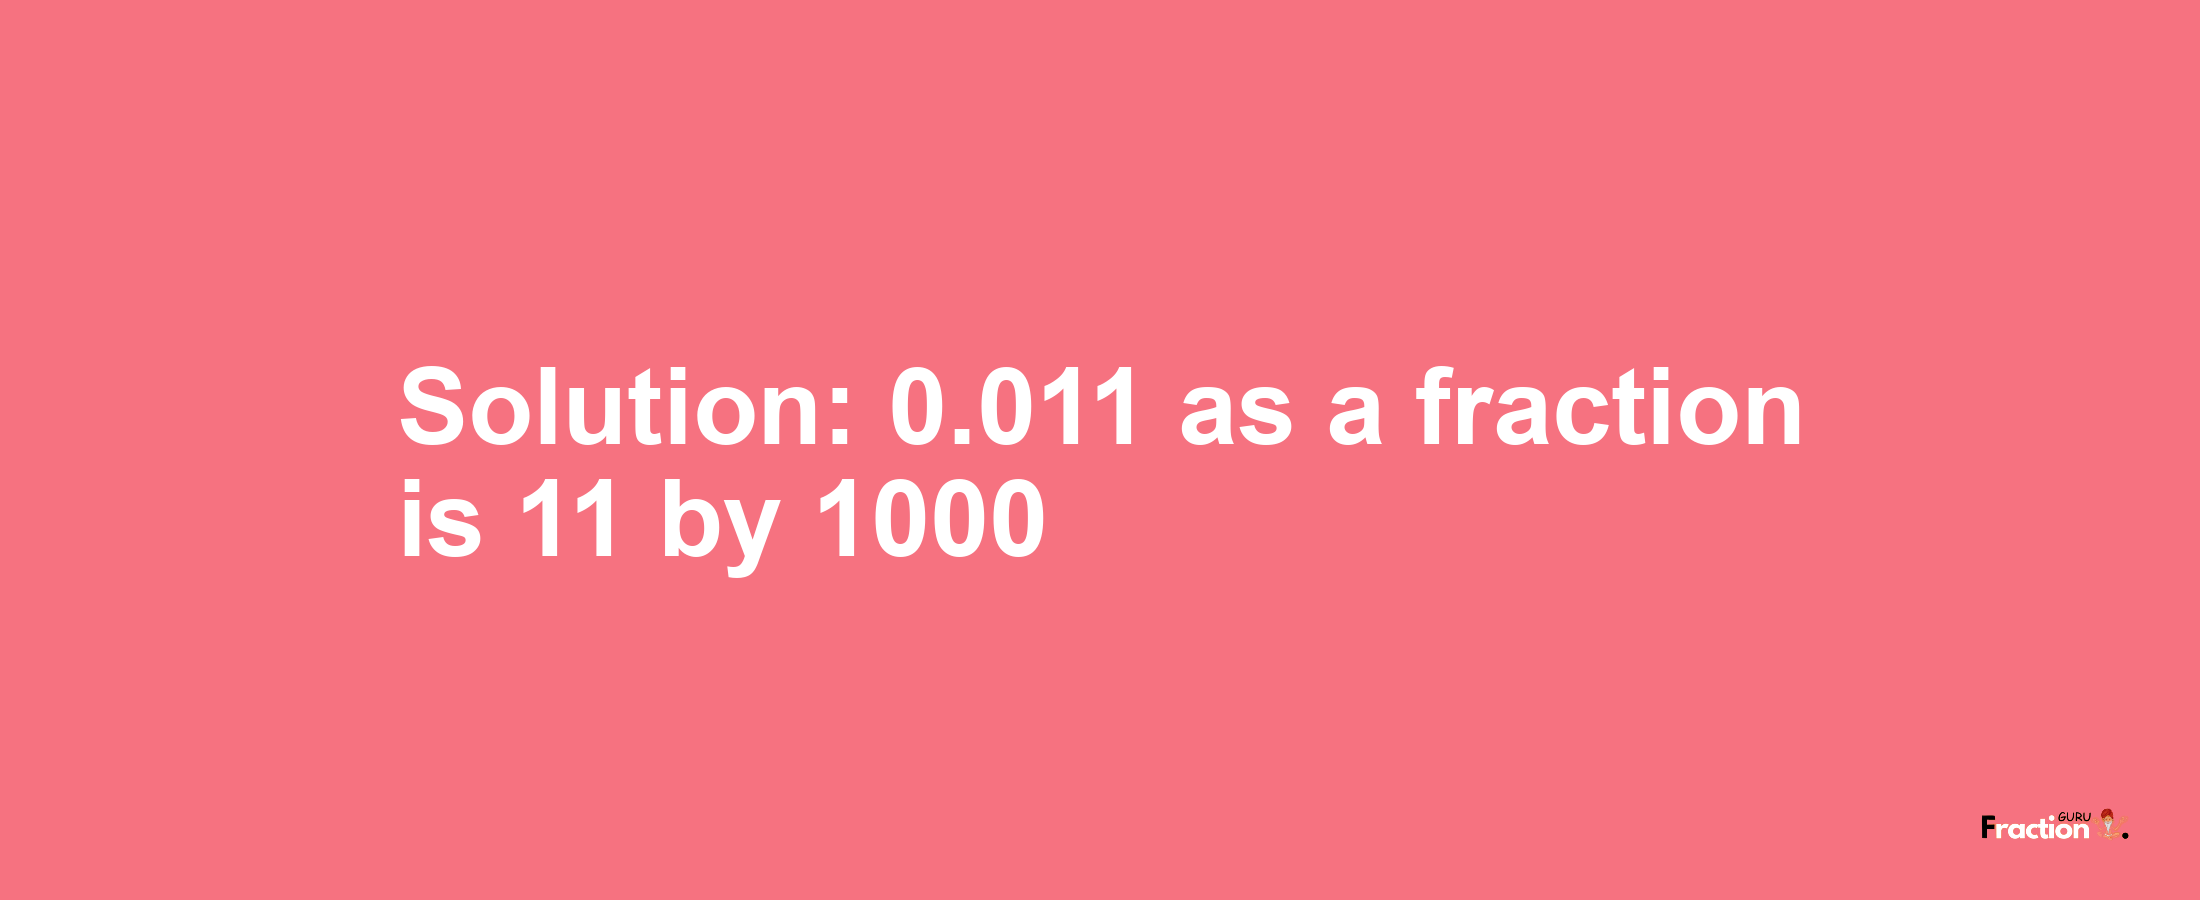 Solution:0.011 as a fraction is 11/1000